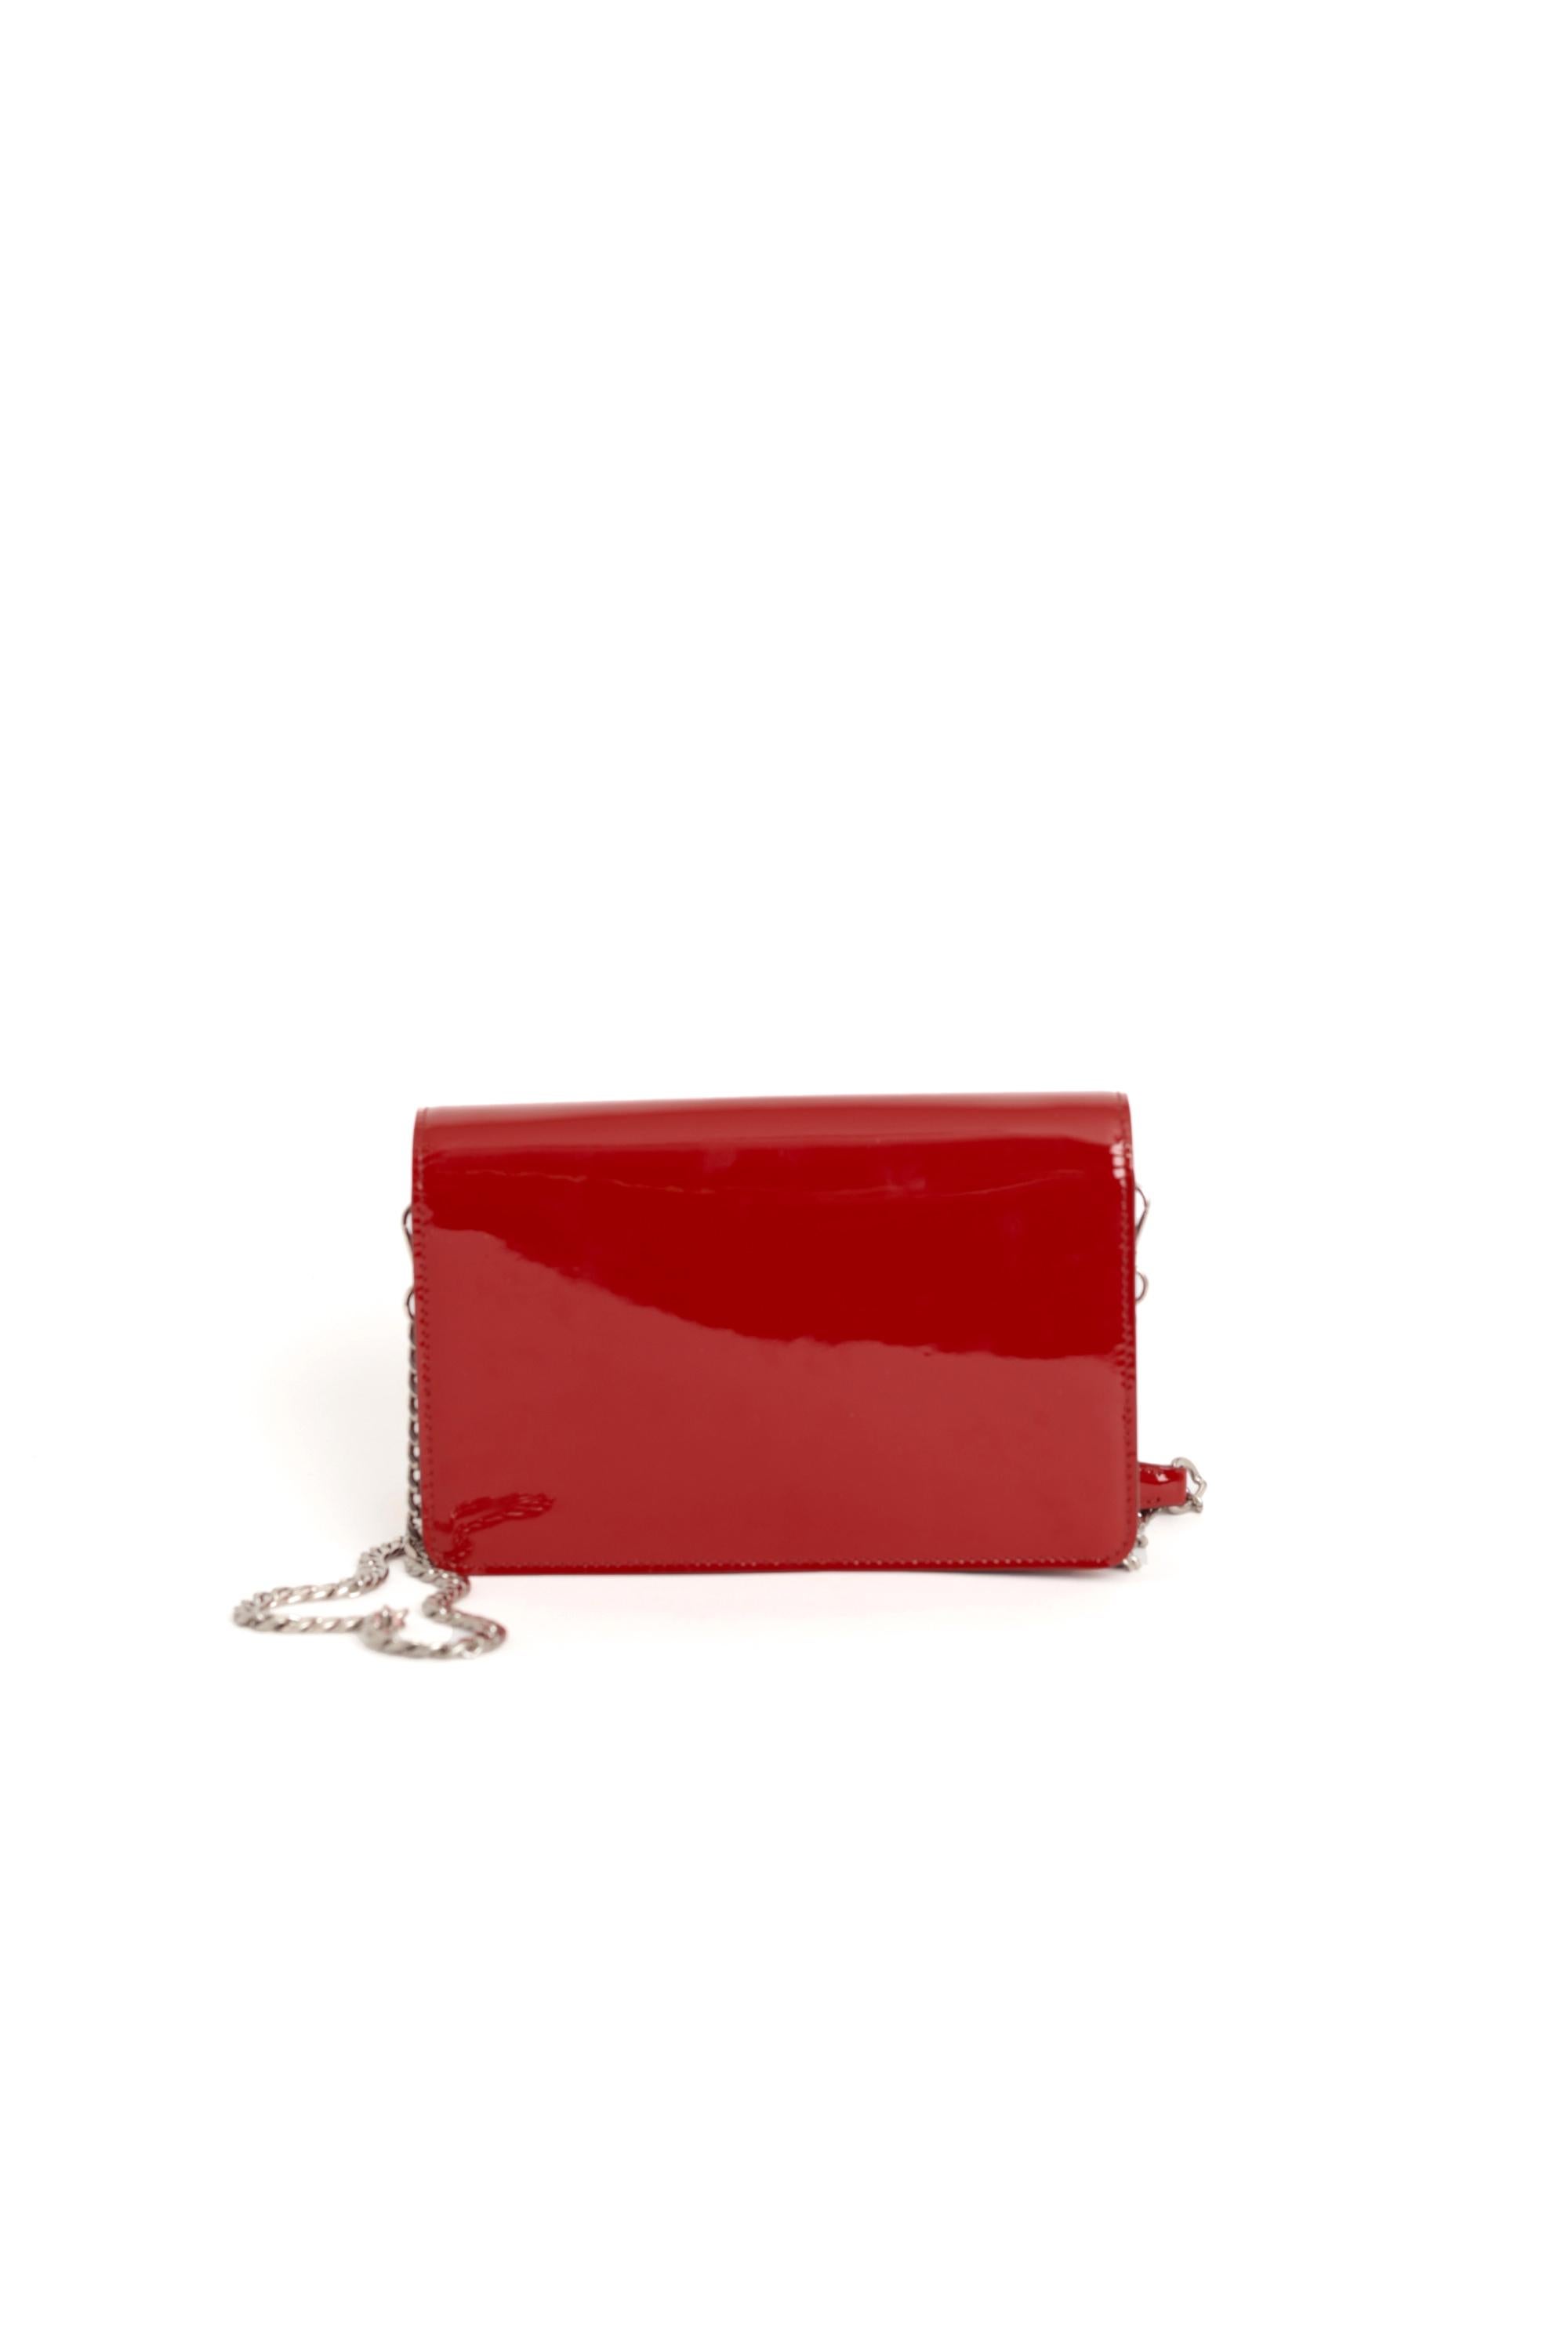 We are excited to present this Miu Miu 2000’s red patent leather mini crystal embellished crossbody bag. Features silver removable chain strap, two inside compartments with a zip pocket and card compartments pocket. Pre-loved, in excellent vintage